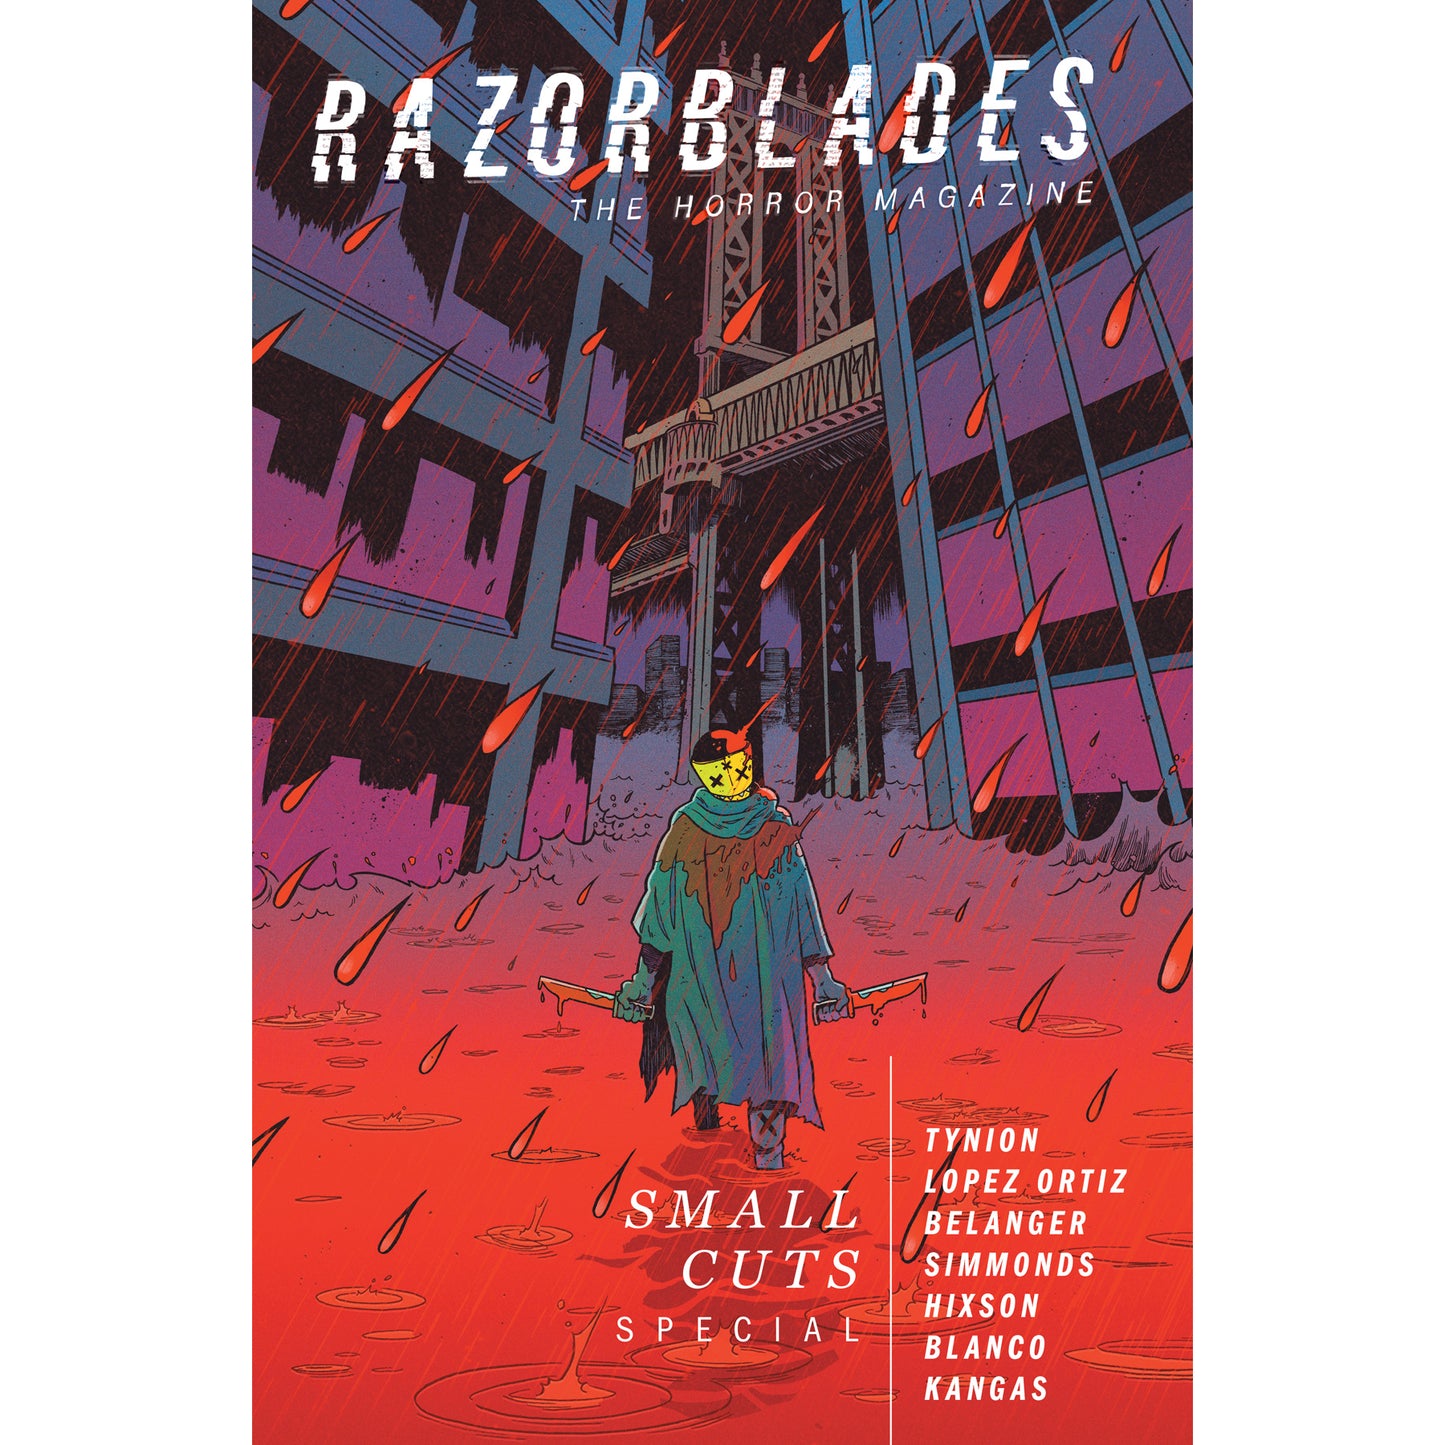 RAZORBLADES SMALL CUTS SPECIAL #1 TINY ONION EXCLUSIVE VARIANT BY TYLER BOSS